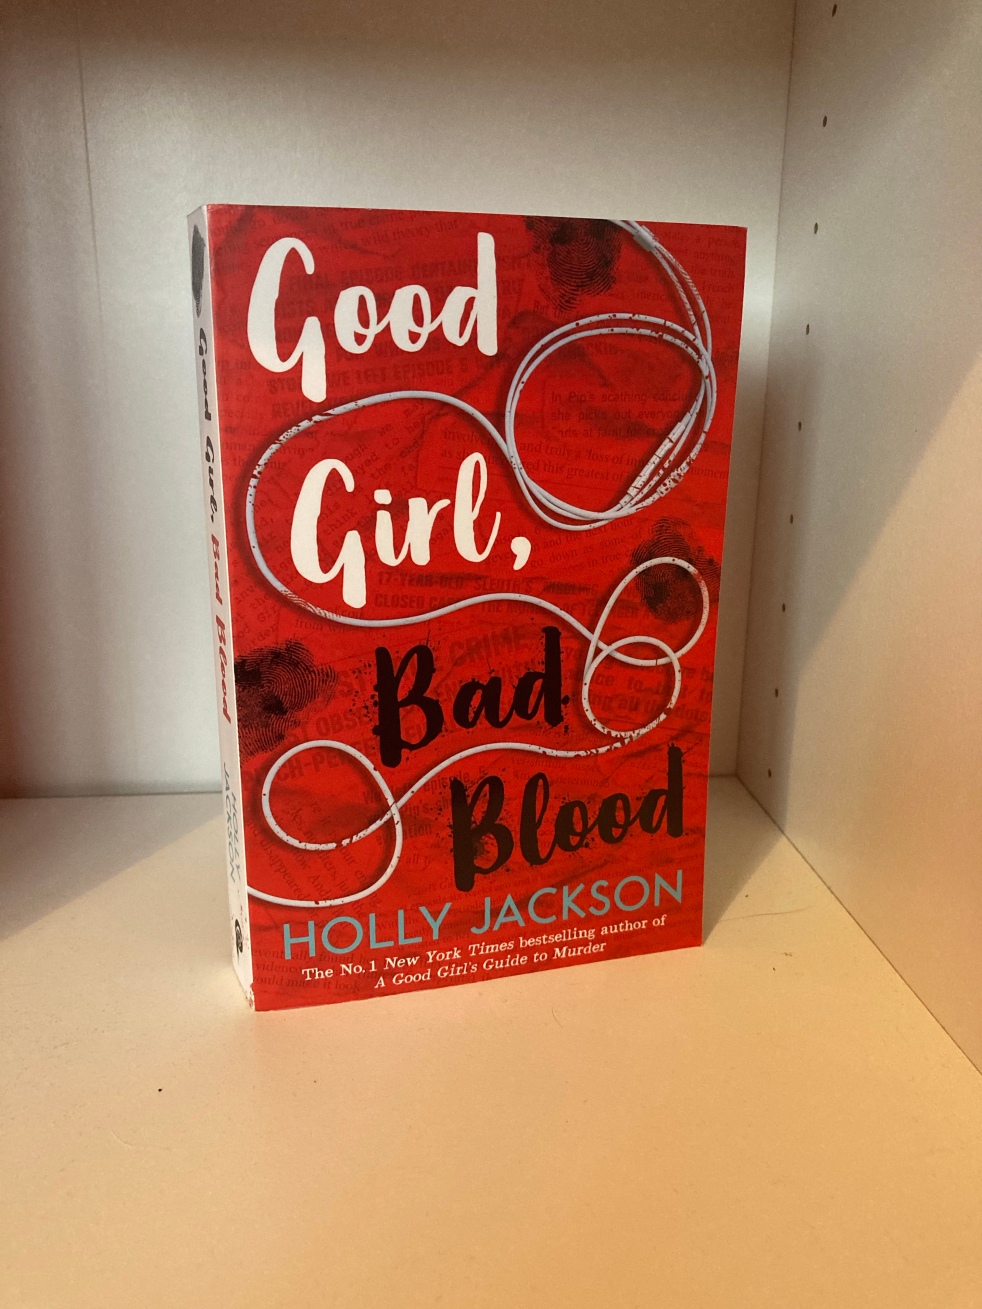 The cover of Good Girl, Bad Blood by Holly Jackson